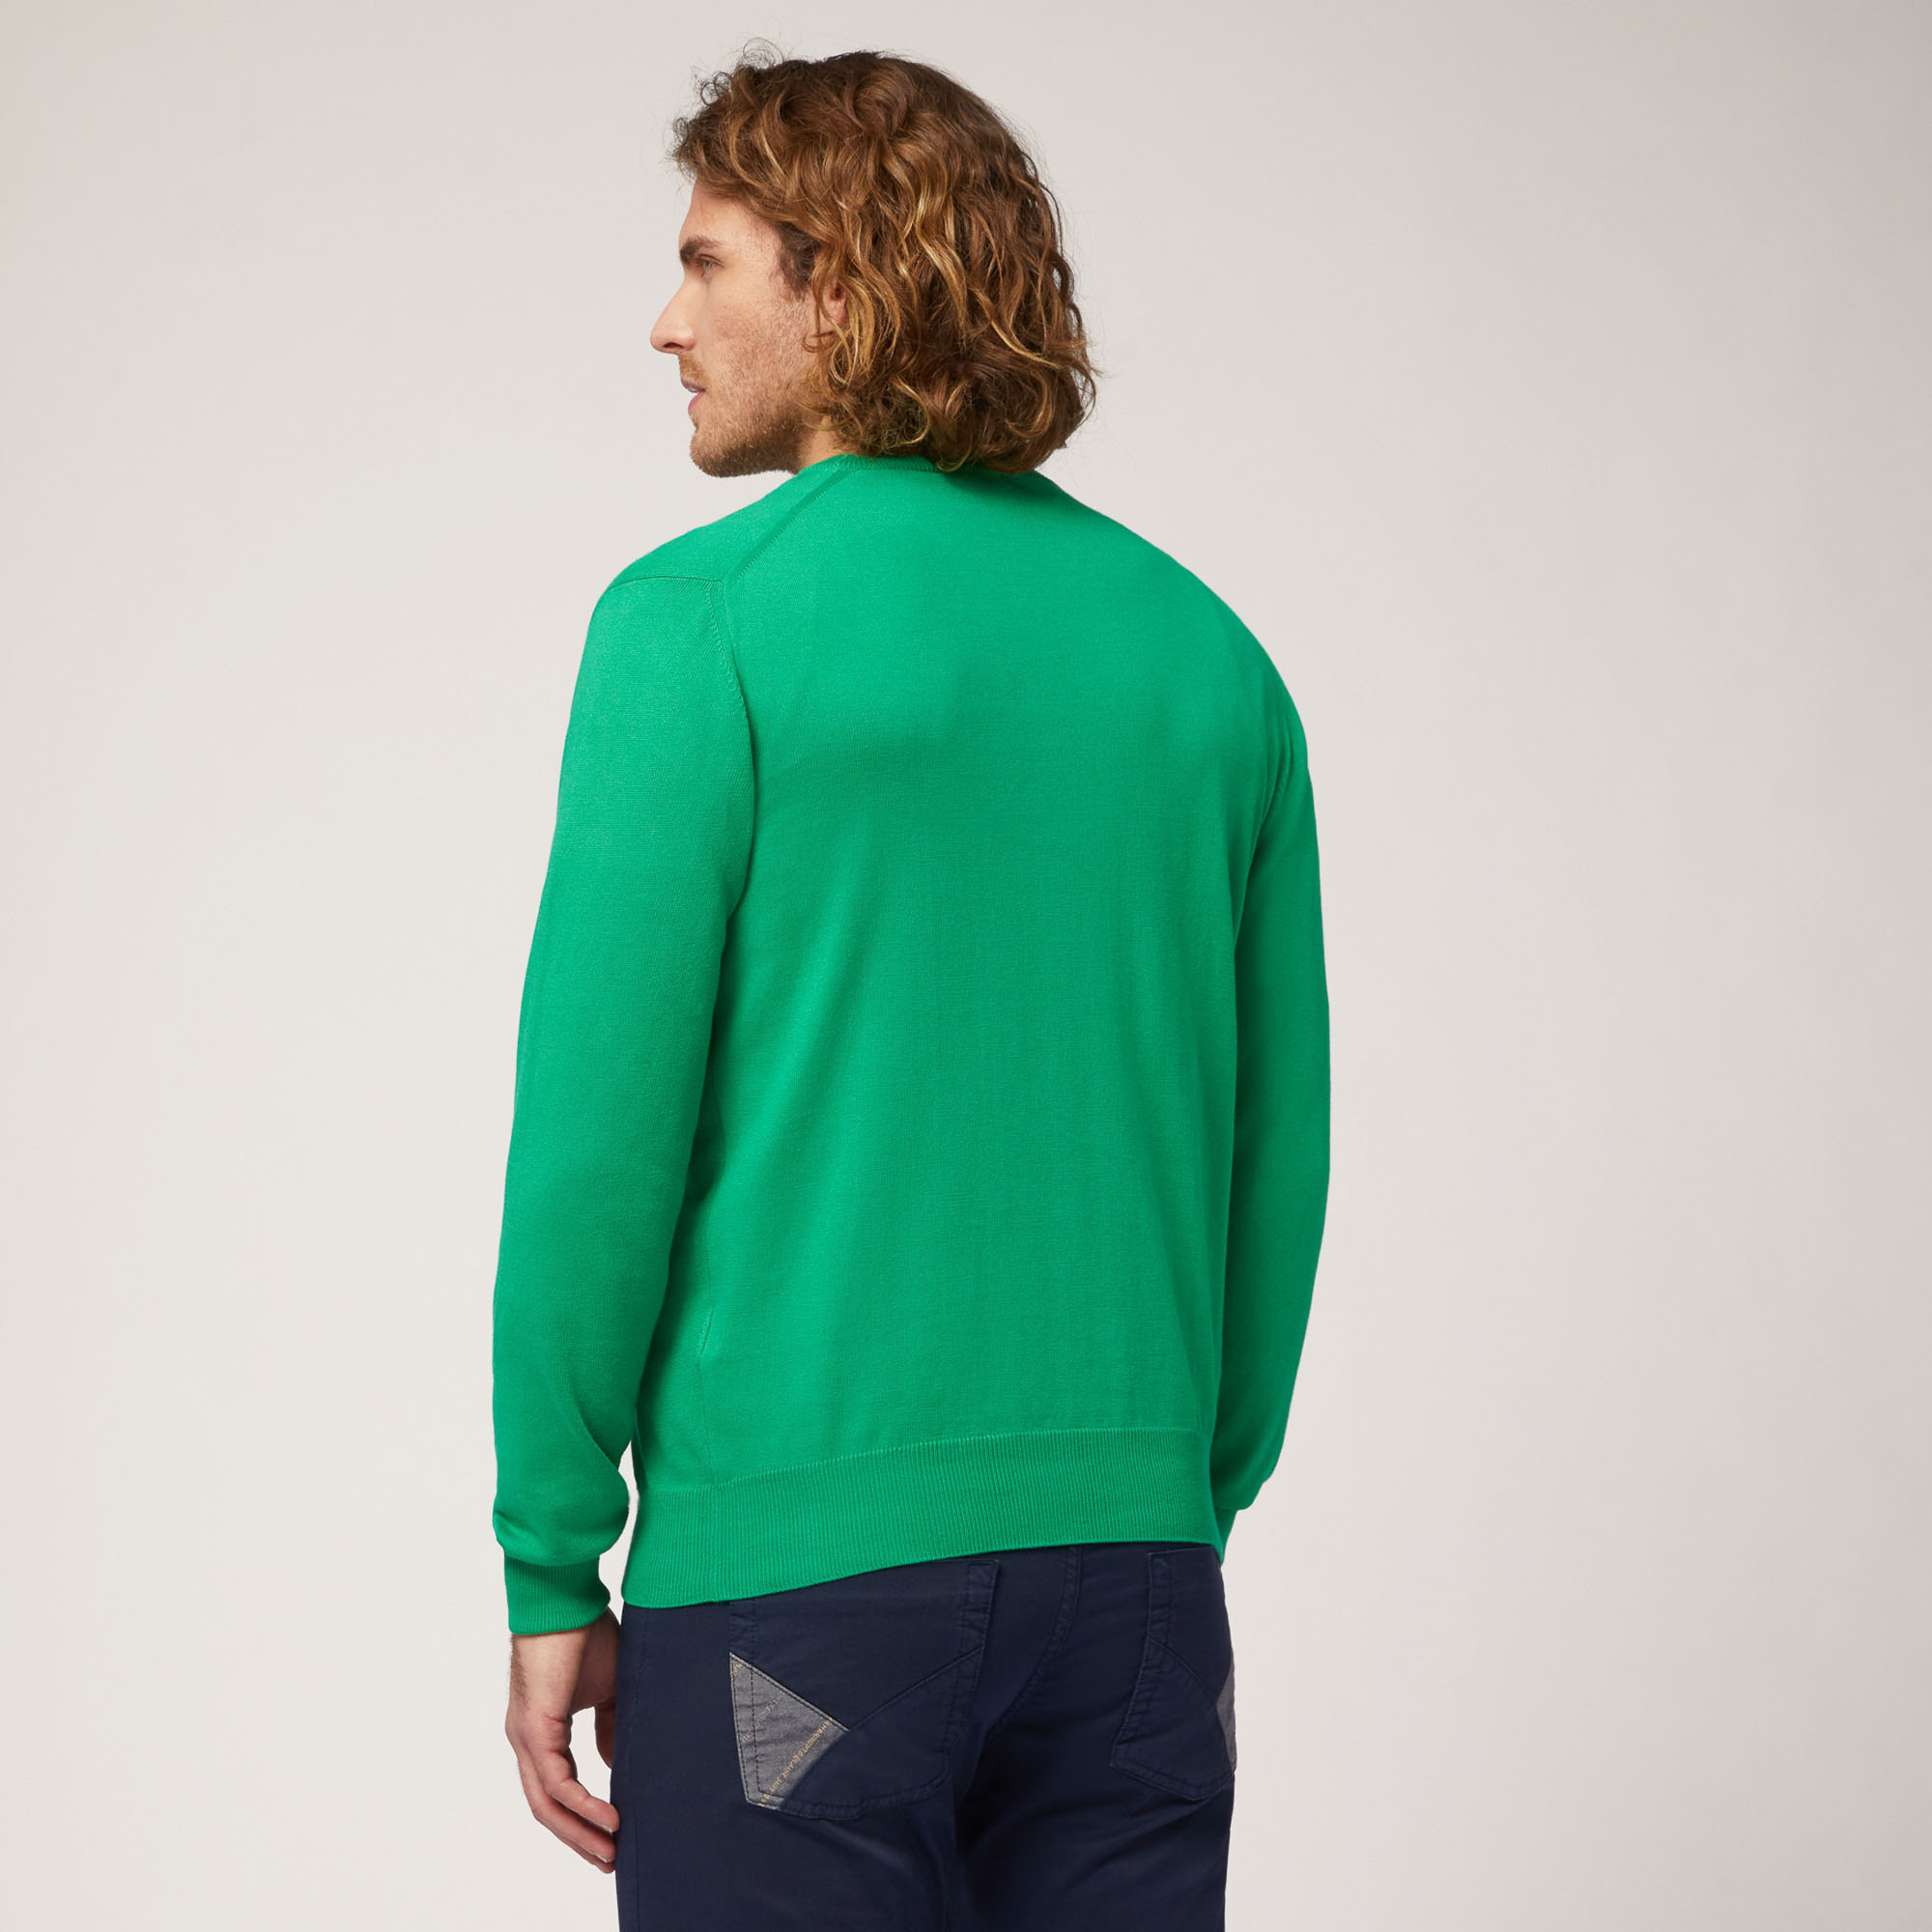 Cotton Crew Neck Pullover, Herb, large image number 1